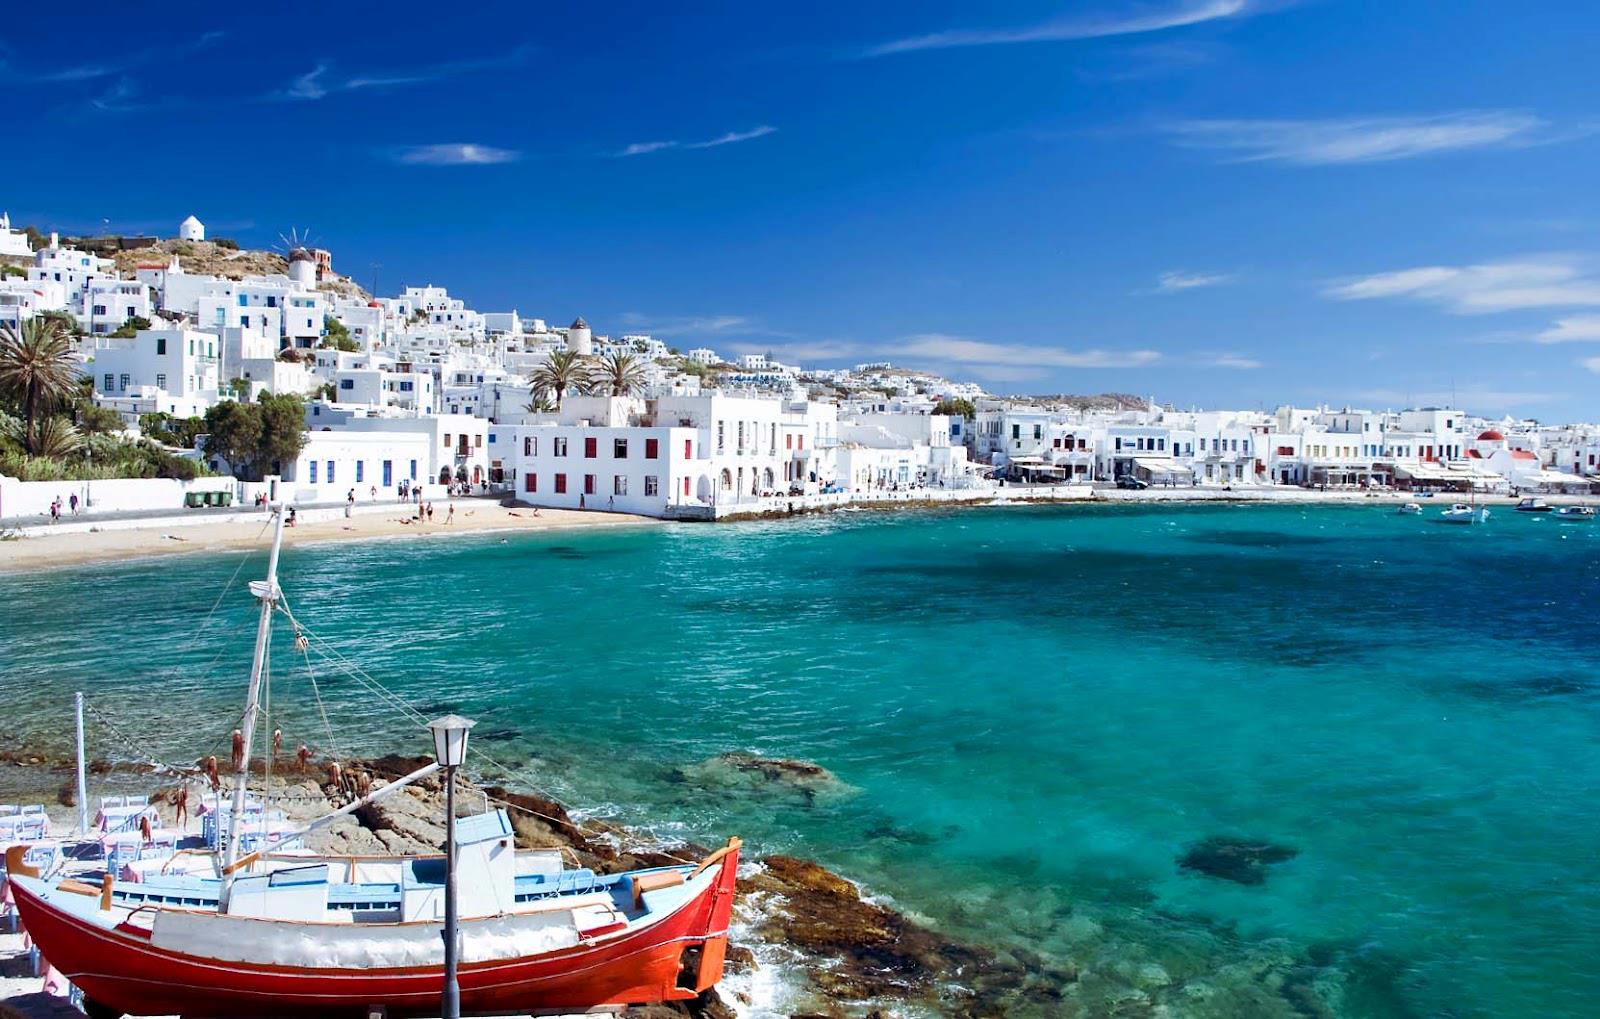 Download this Greek Islands picture